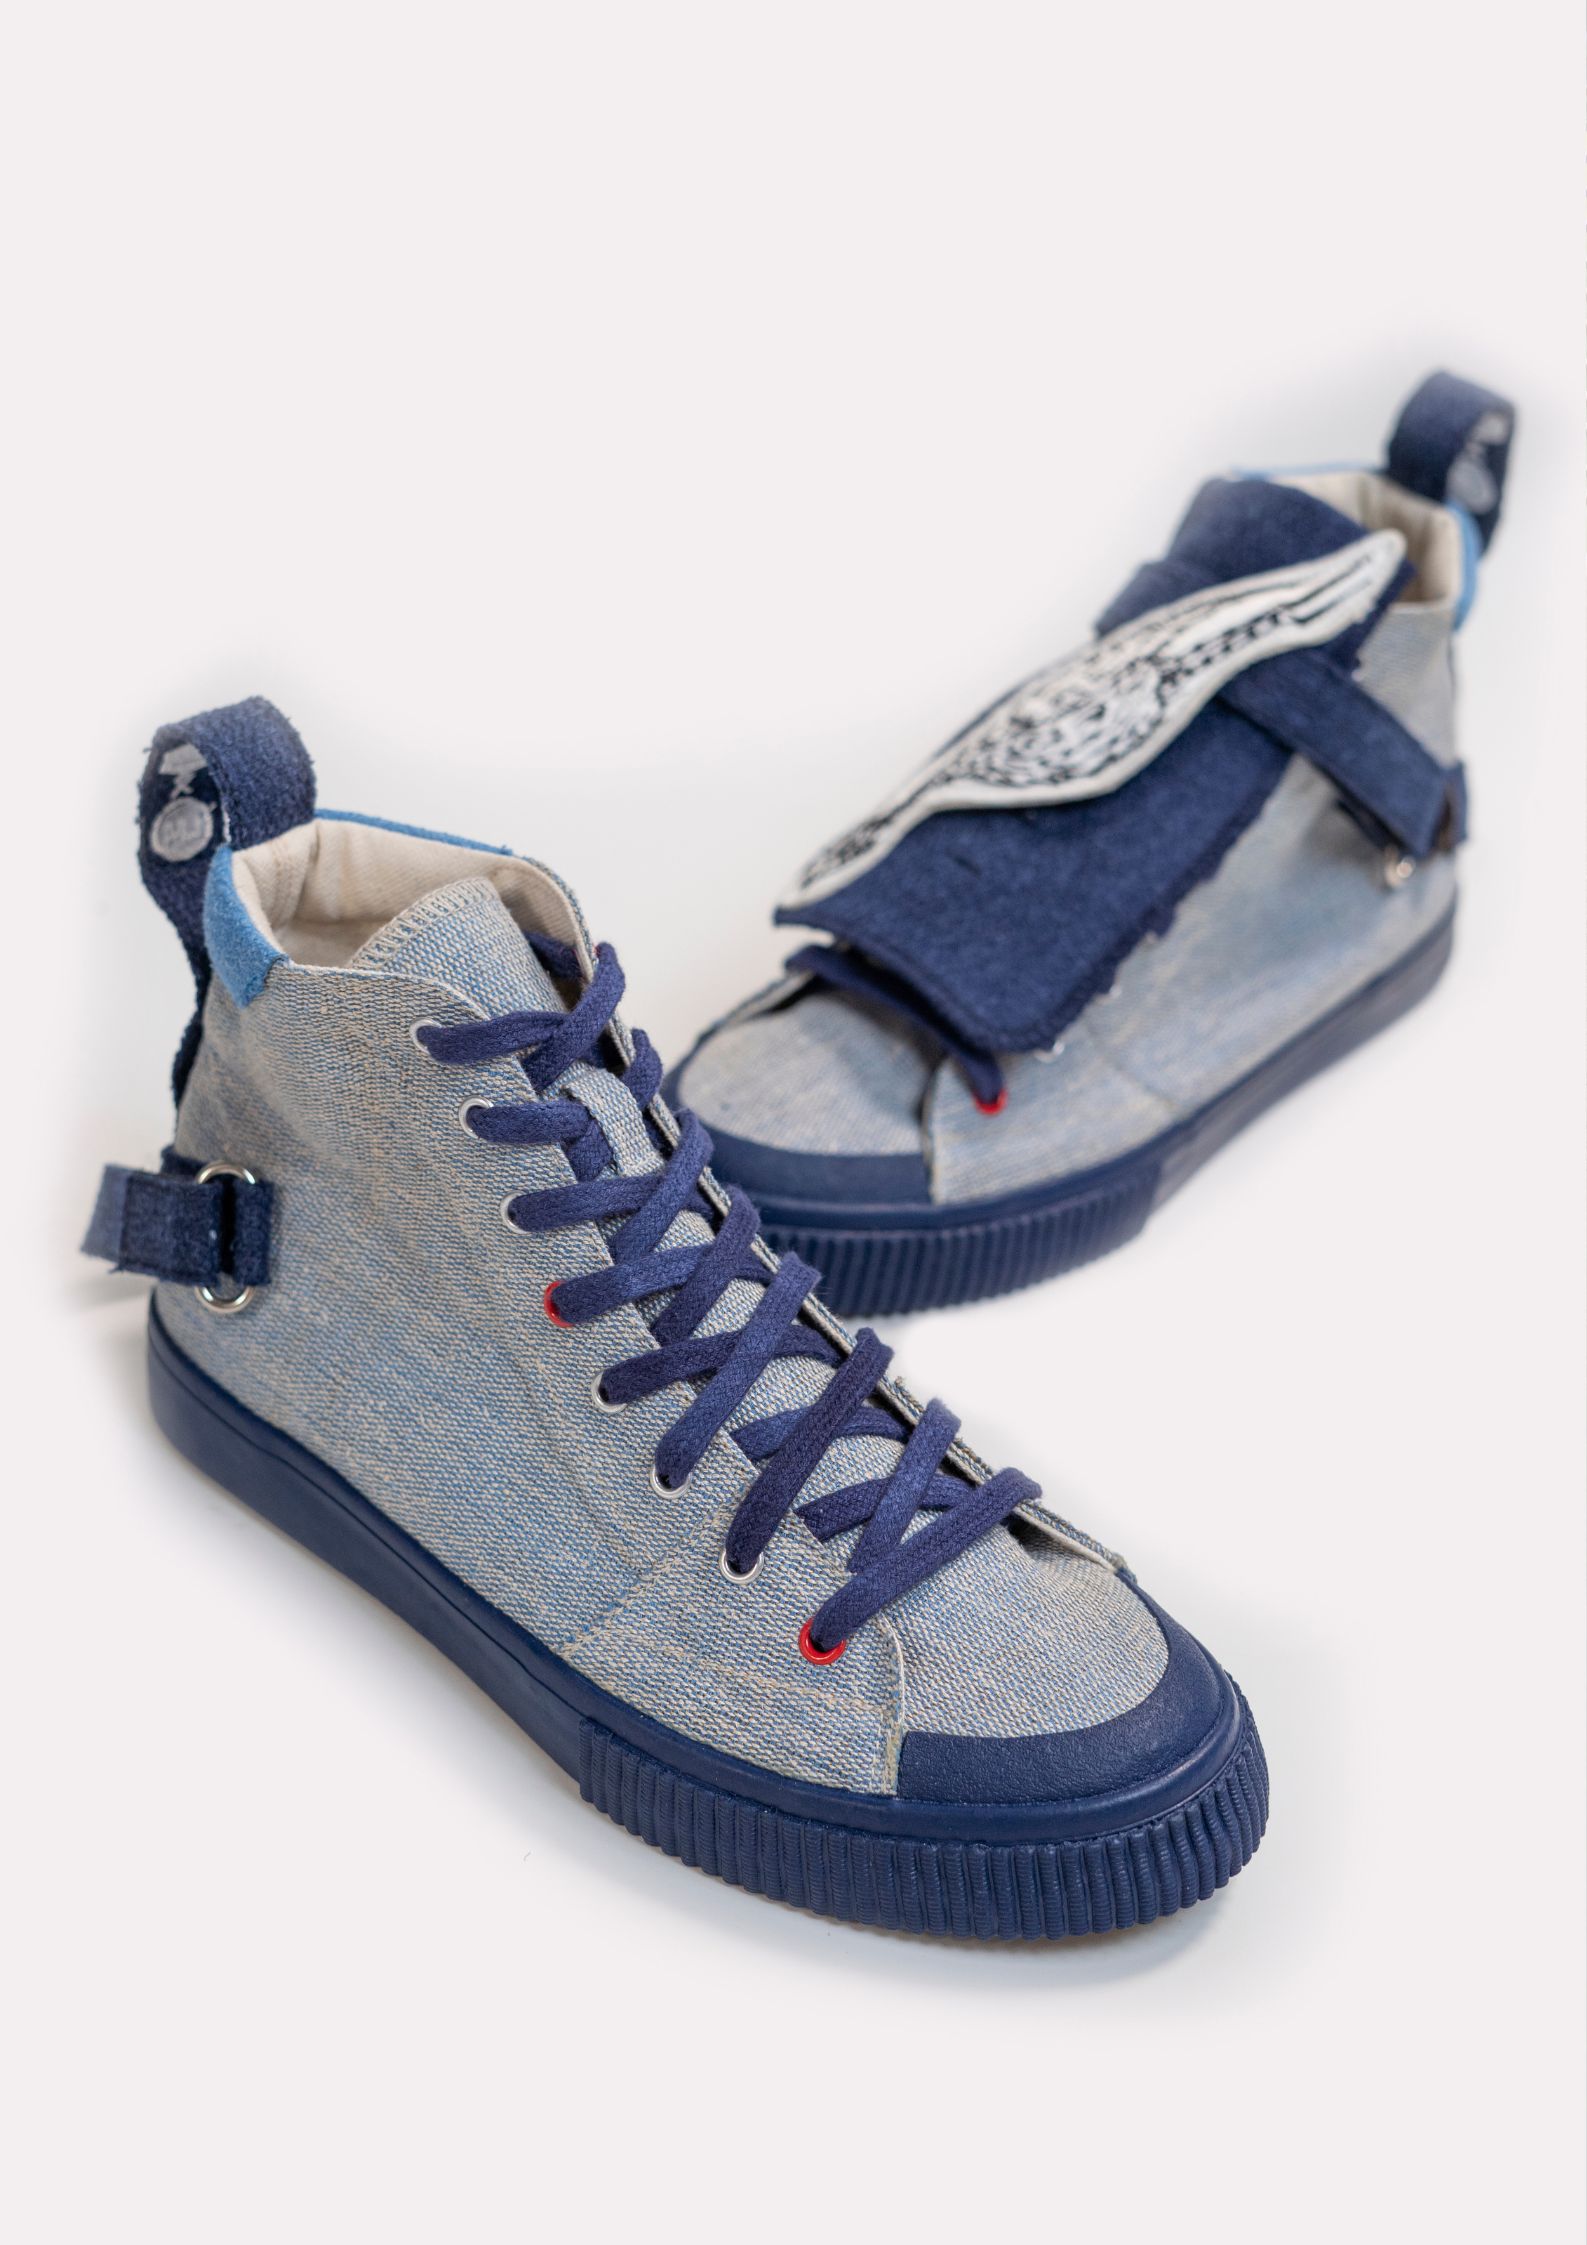 Blue LakArt sneakers by Lilianna Manahan.